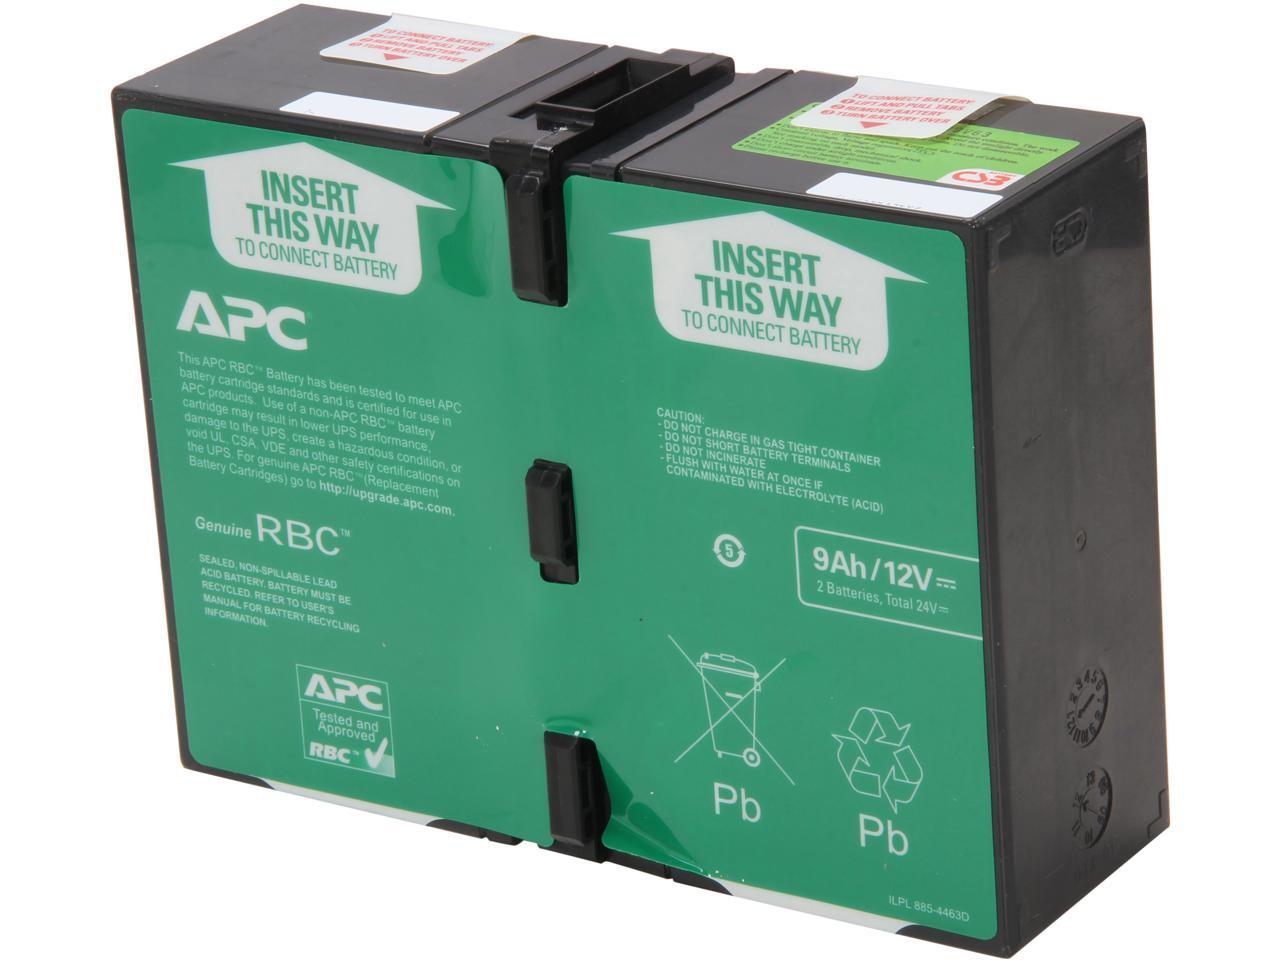 Apc Ups Battery Replacement For Apc Ups Model Br1500g